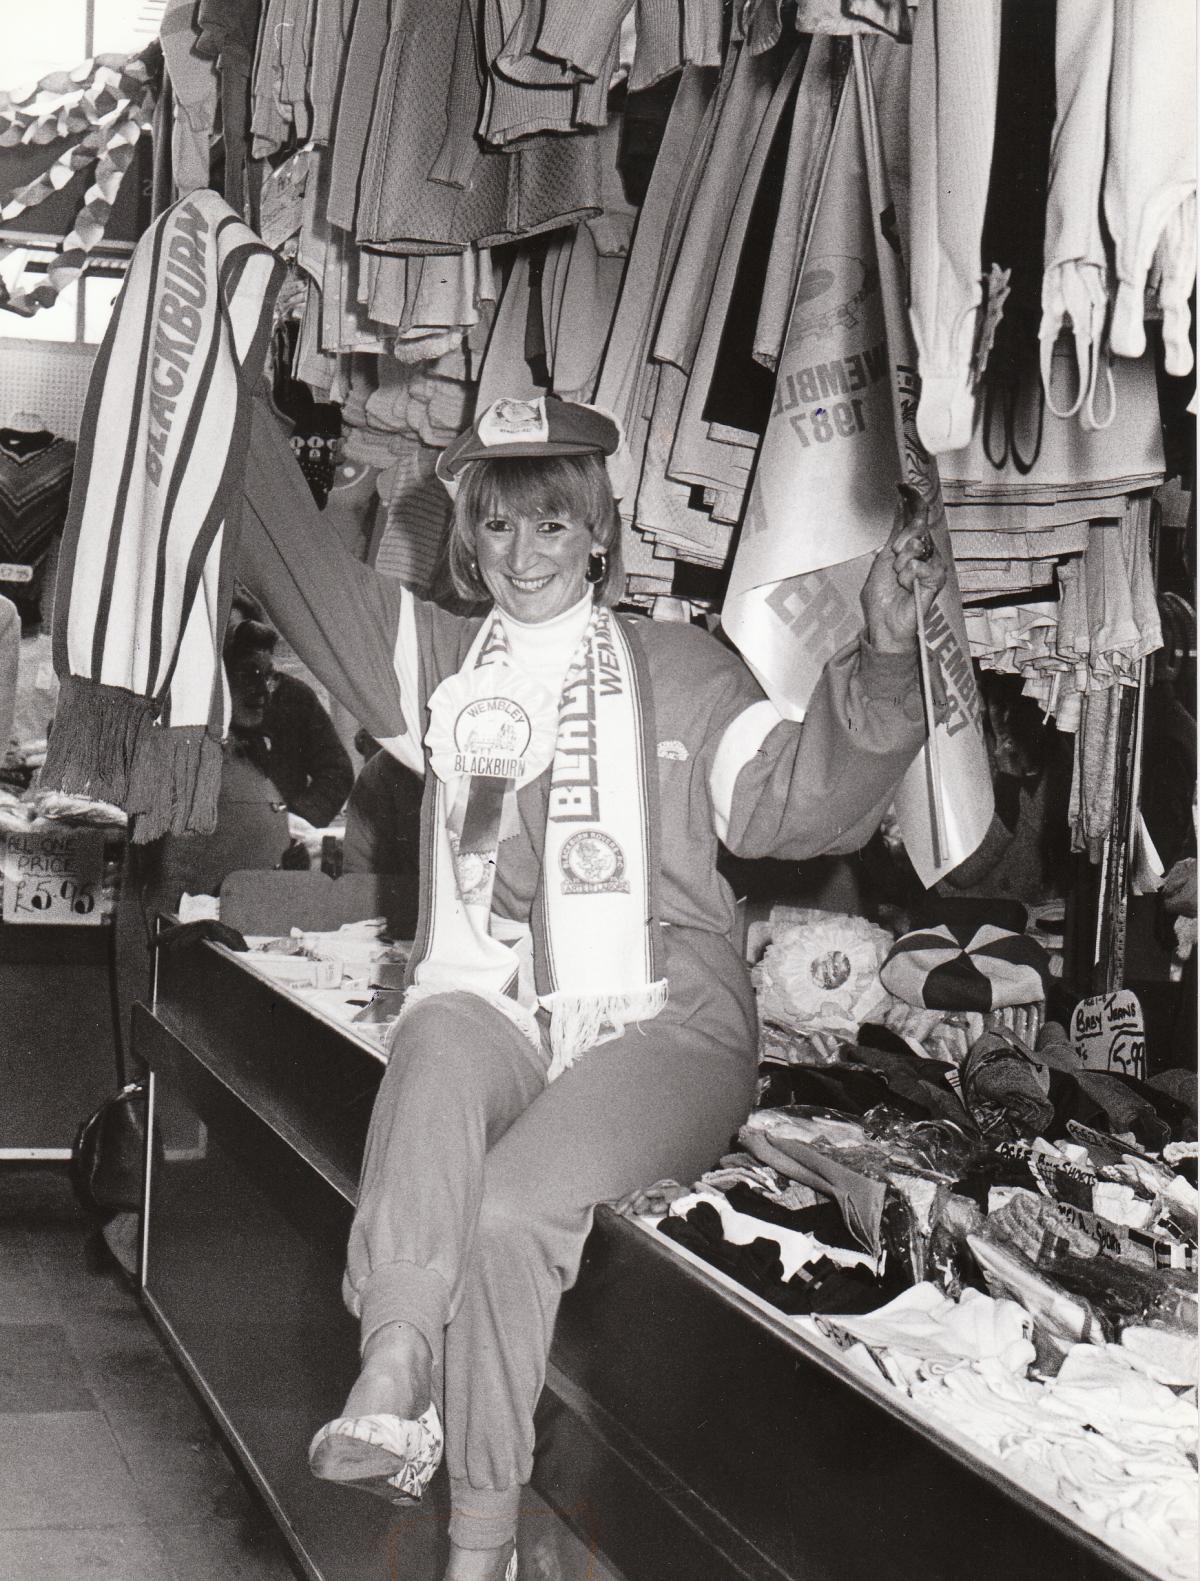 Sheila Donaghy dressed ready for Rover's cup final in 1987.